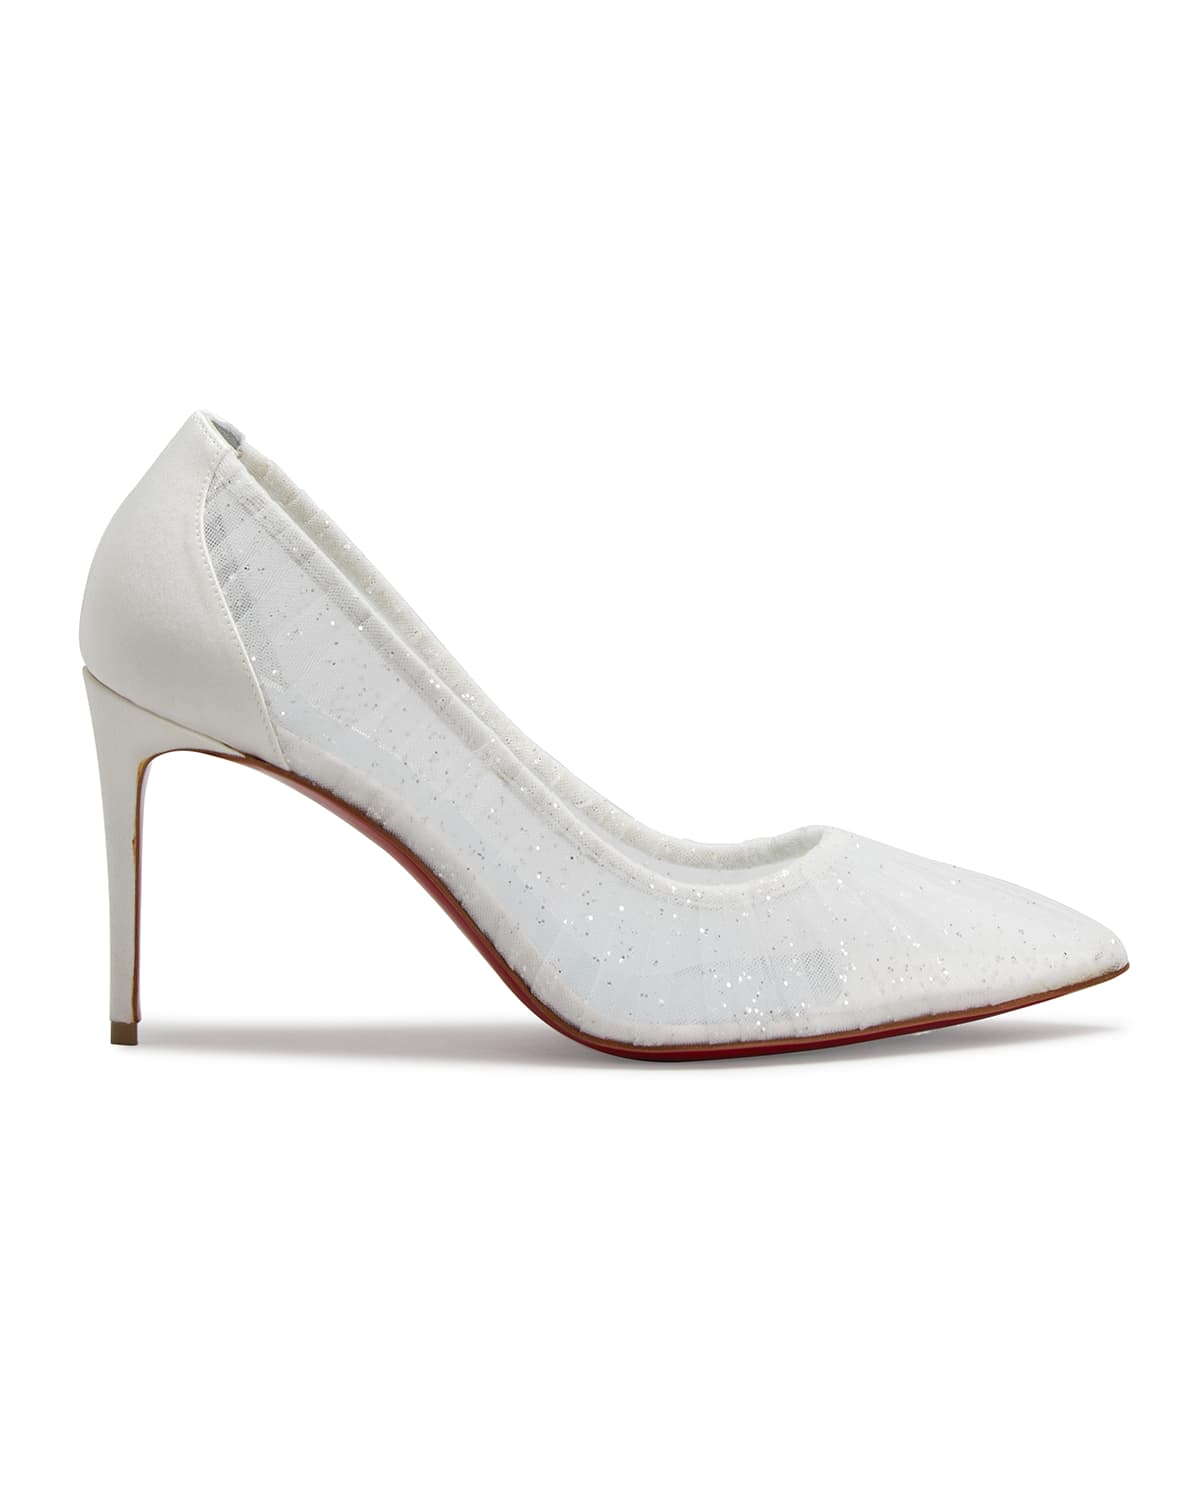 Christian Louboutin Kate Draperia 85mm Red Sole Pumps